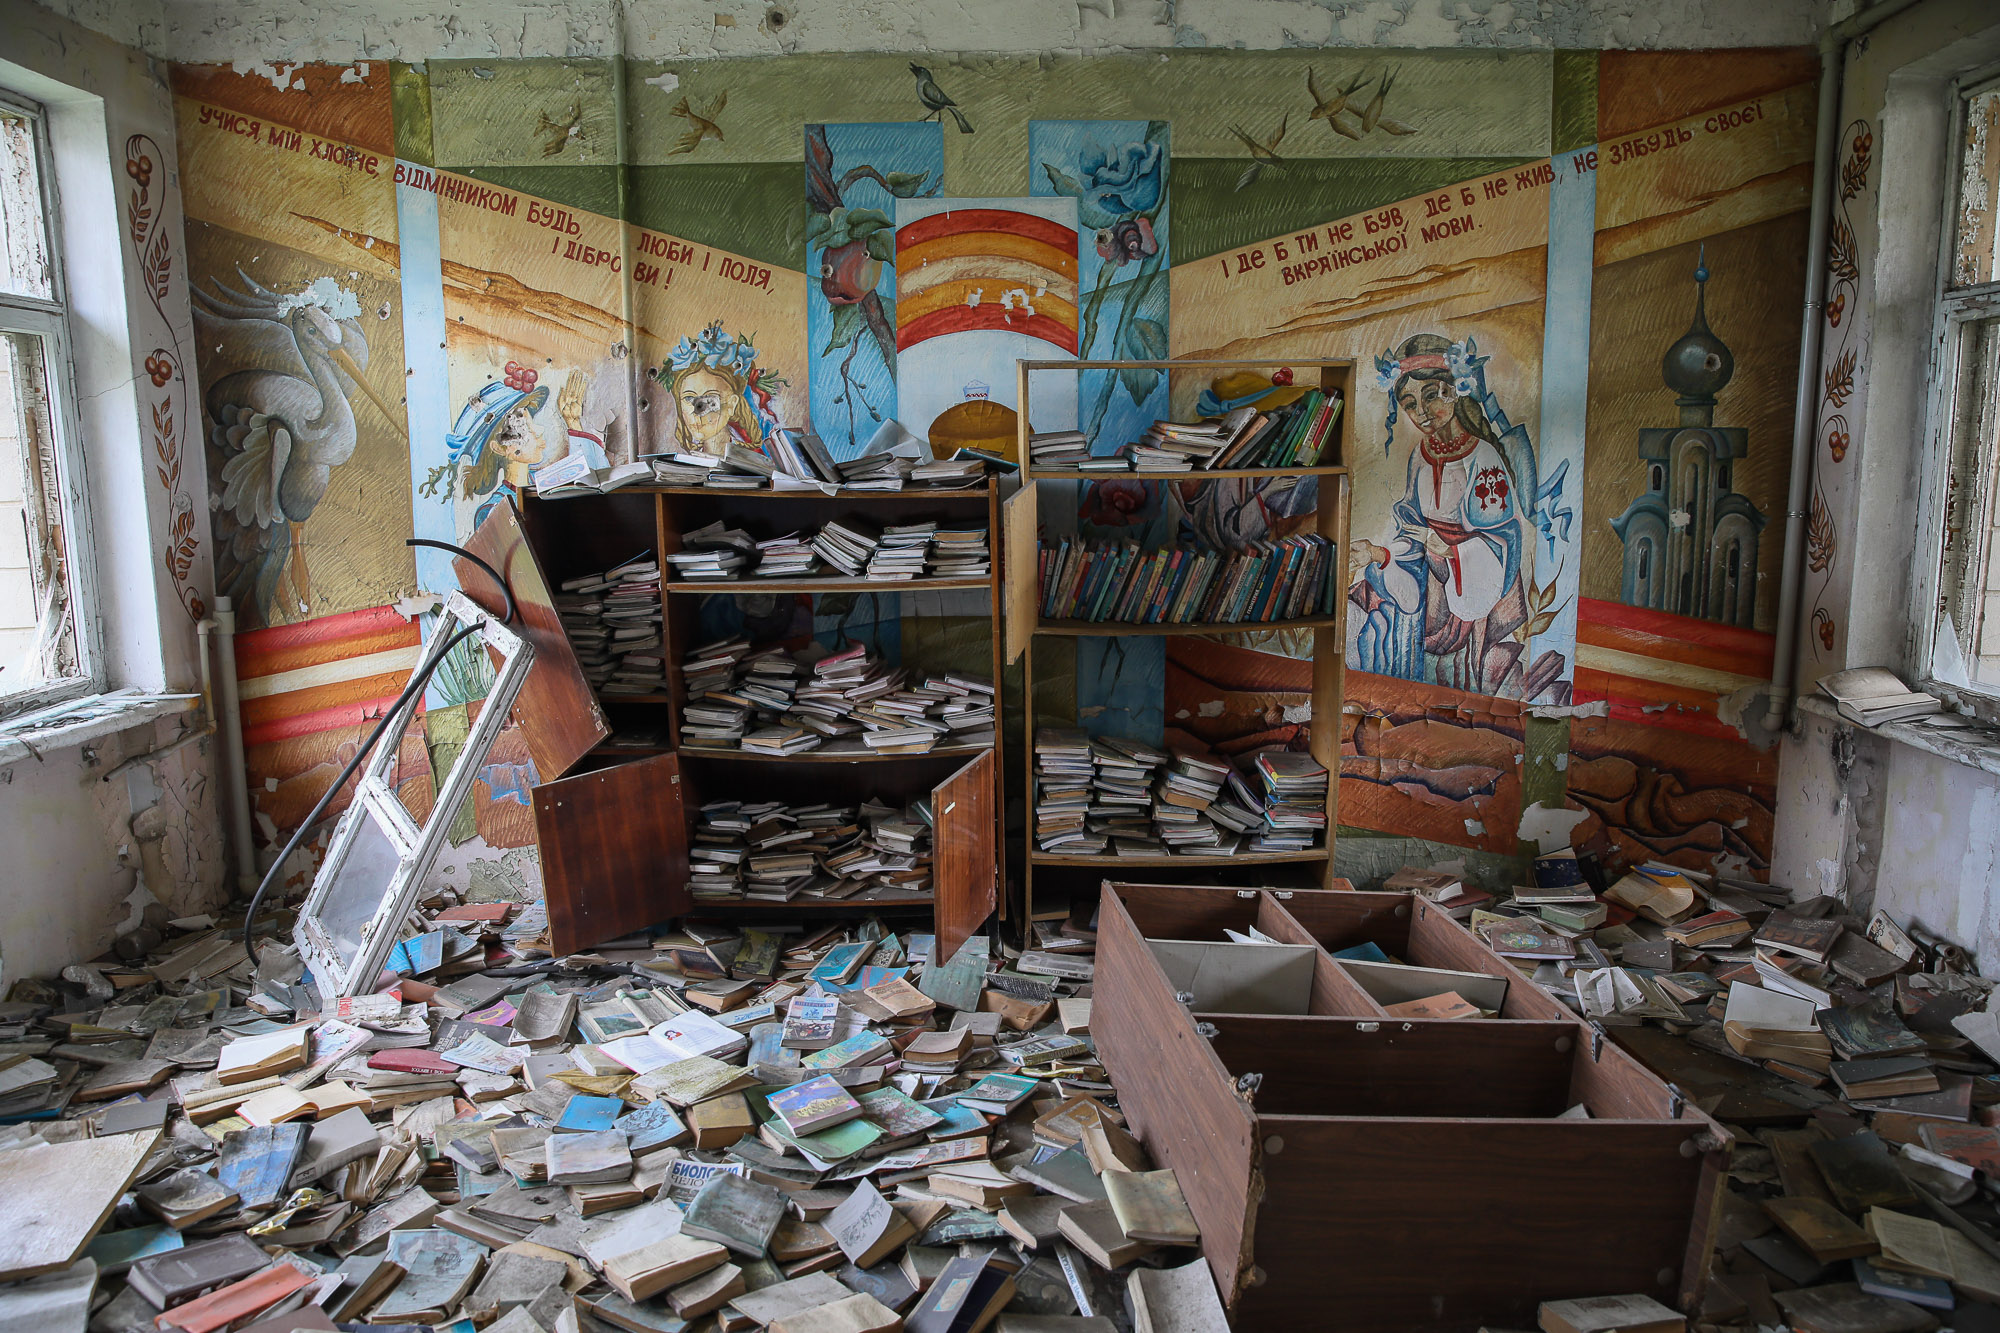 Piles of textbooks scattered on the floor in the ruined local school building in the town of Opytne, eastern Ukraine, pictured on June 12, 2019.